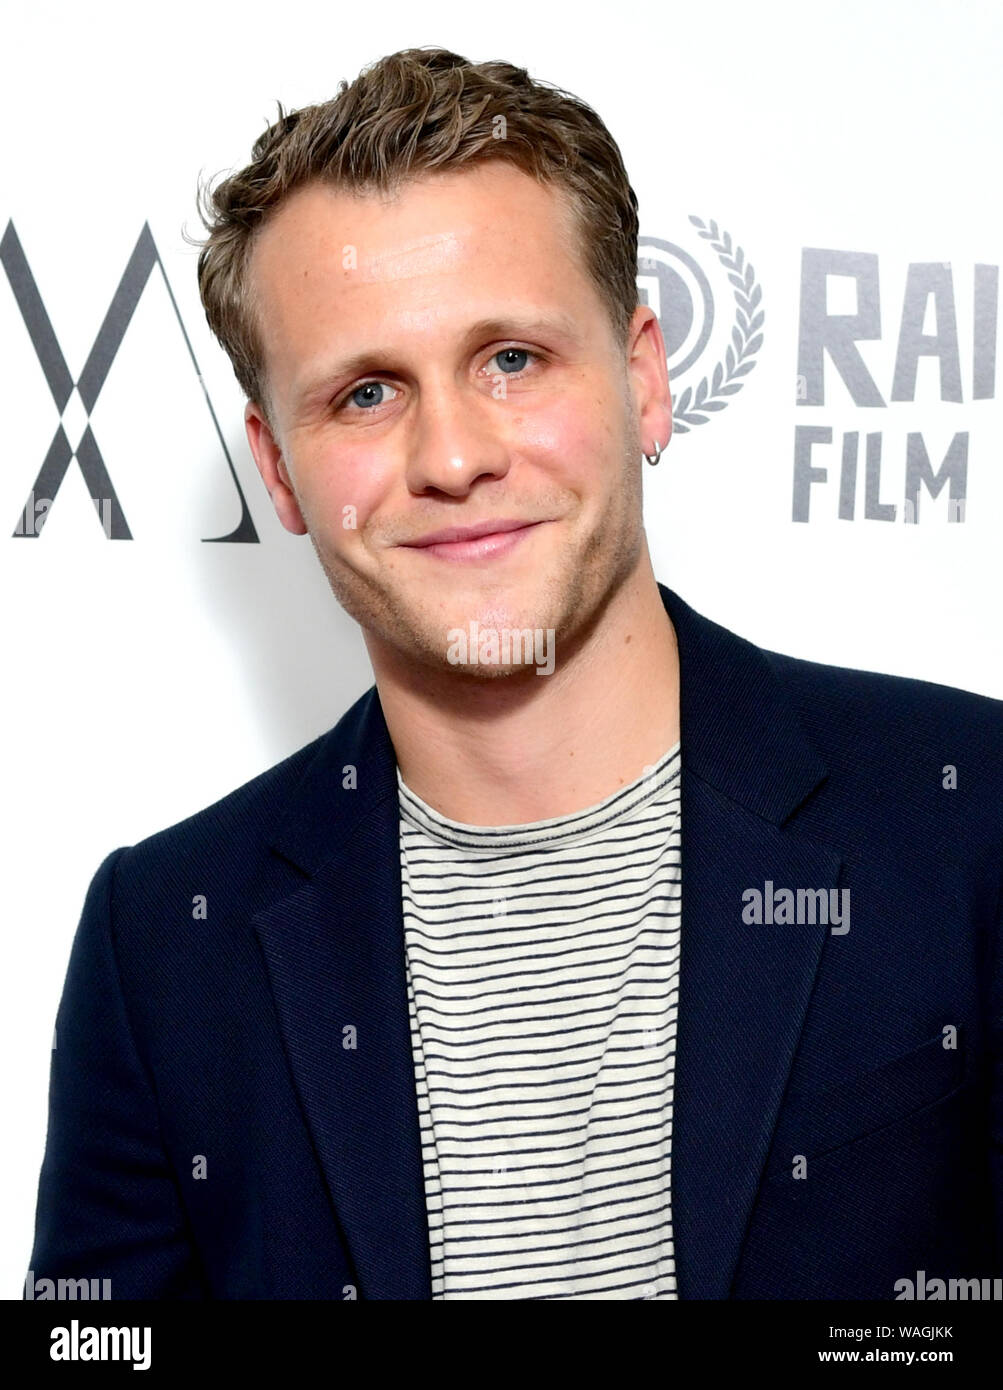 josh dylan high resolution stock photography images alamy